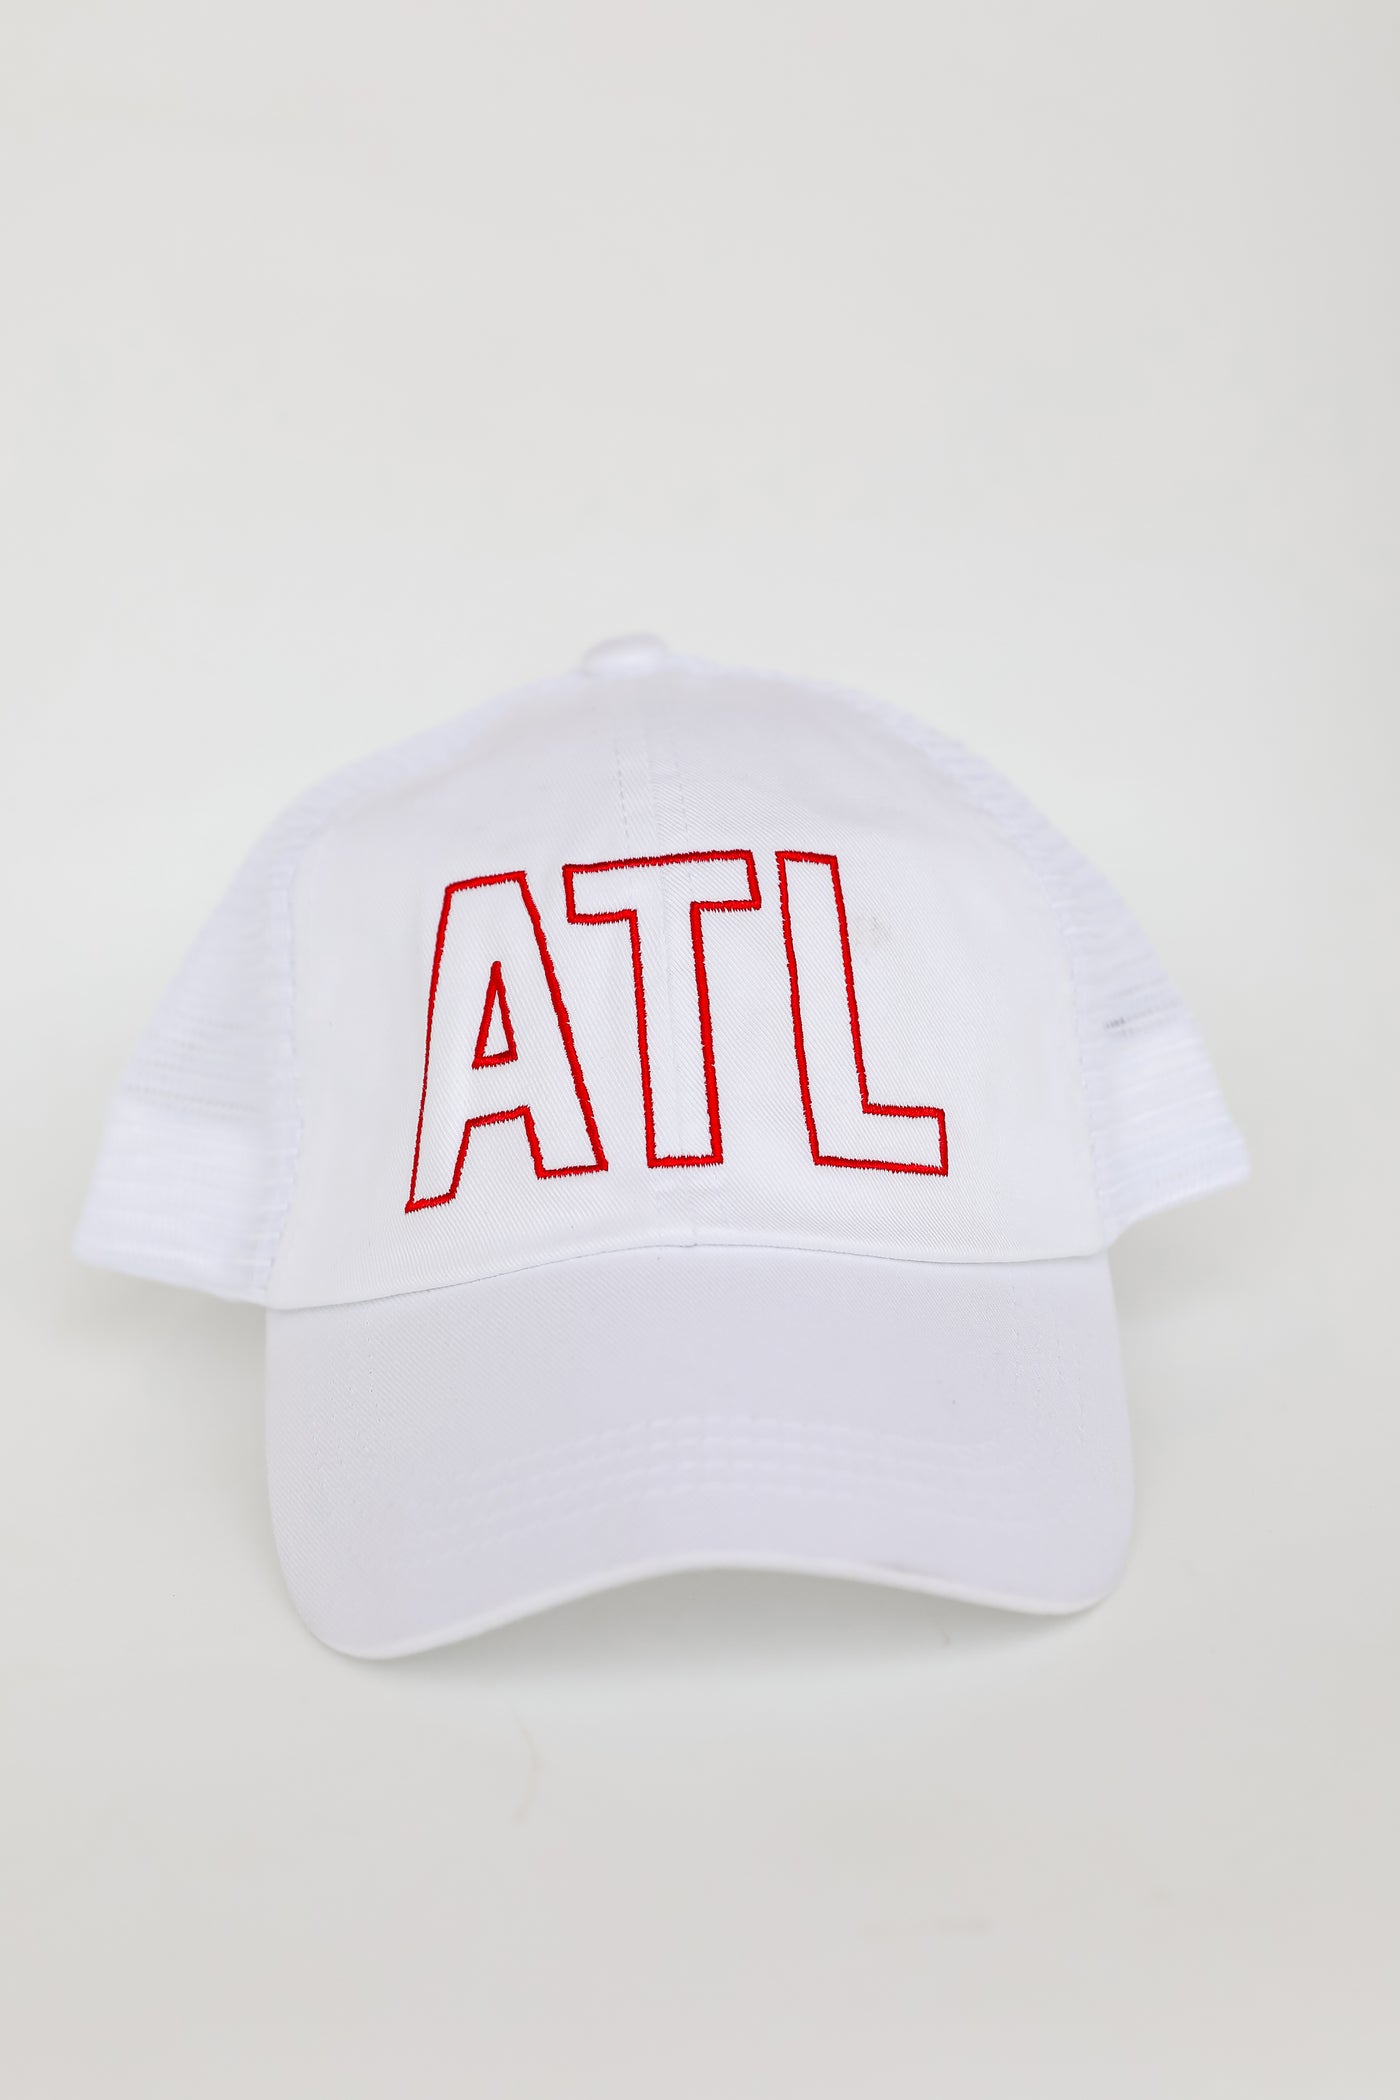 ATL Embroidered Mesh Hat front view